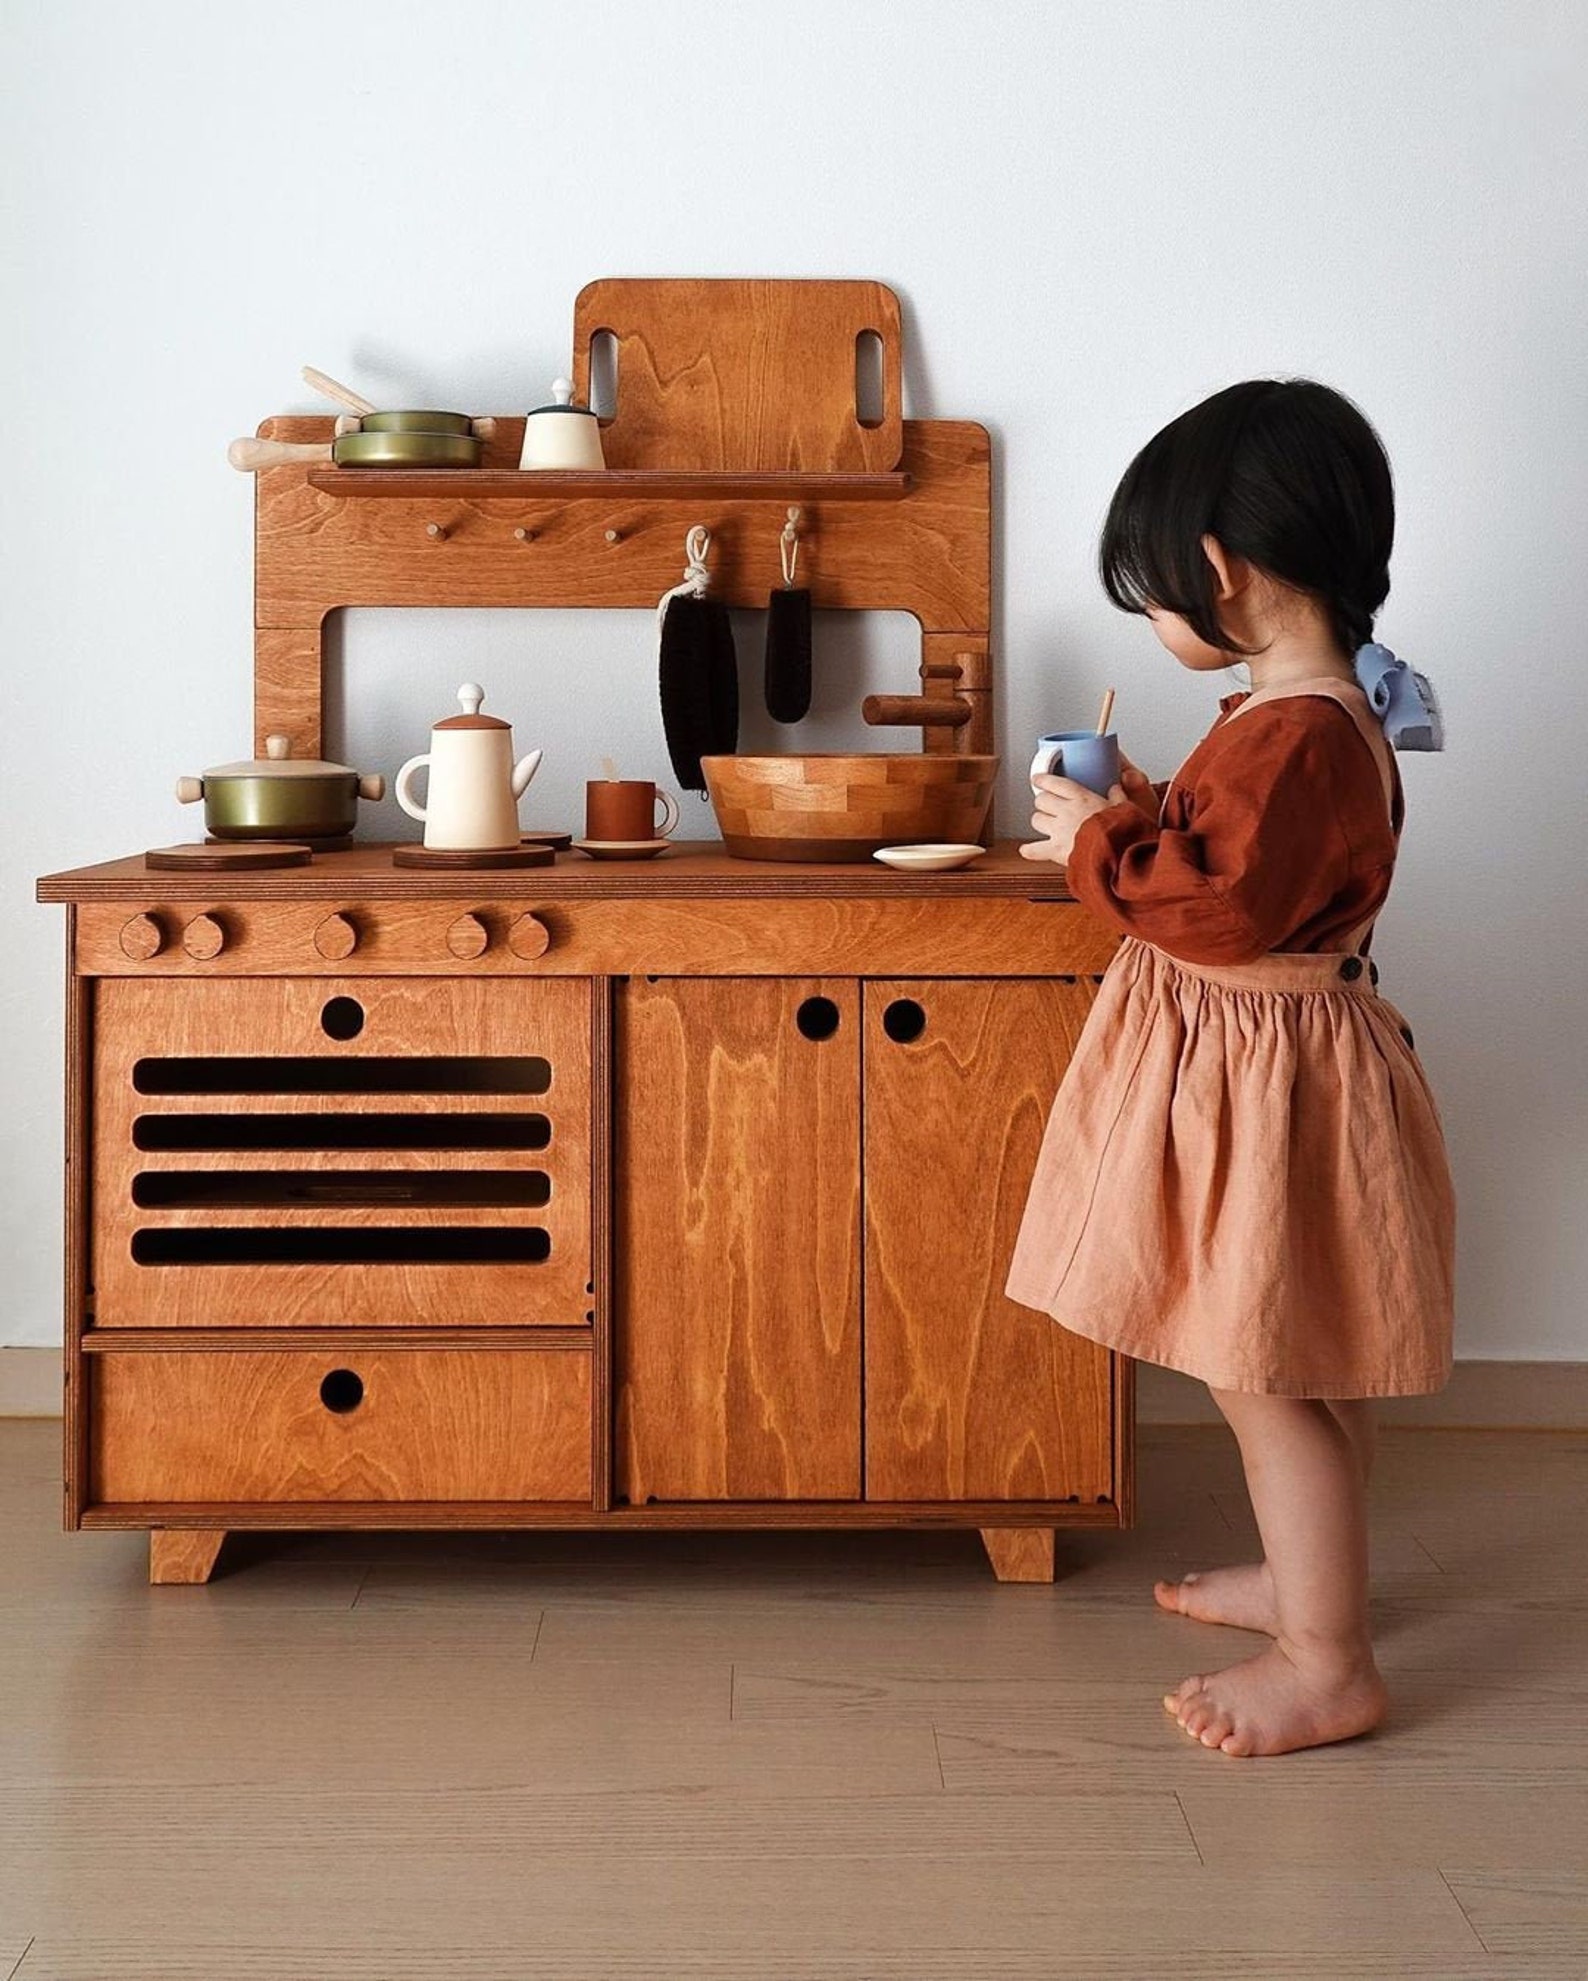 Play Kitchen Concept Inspiration (Source: Etsy, midmini)